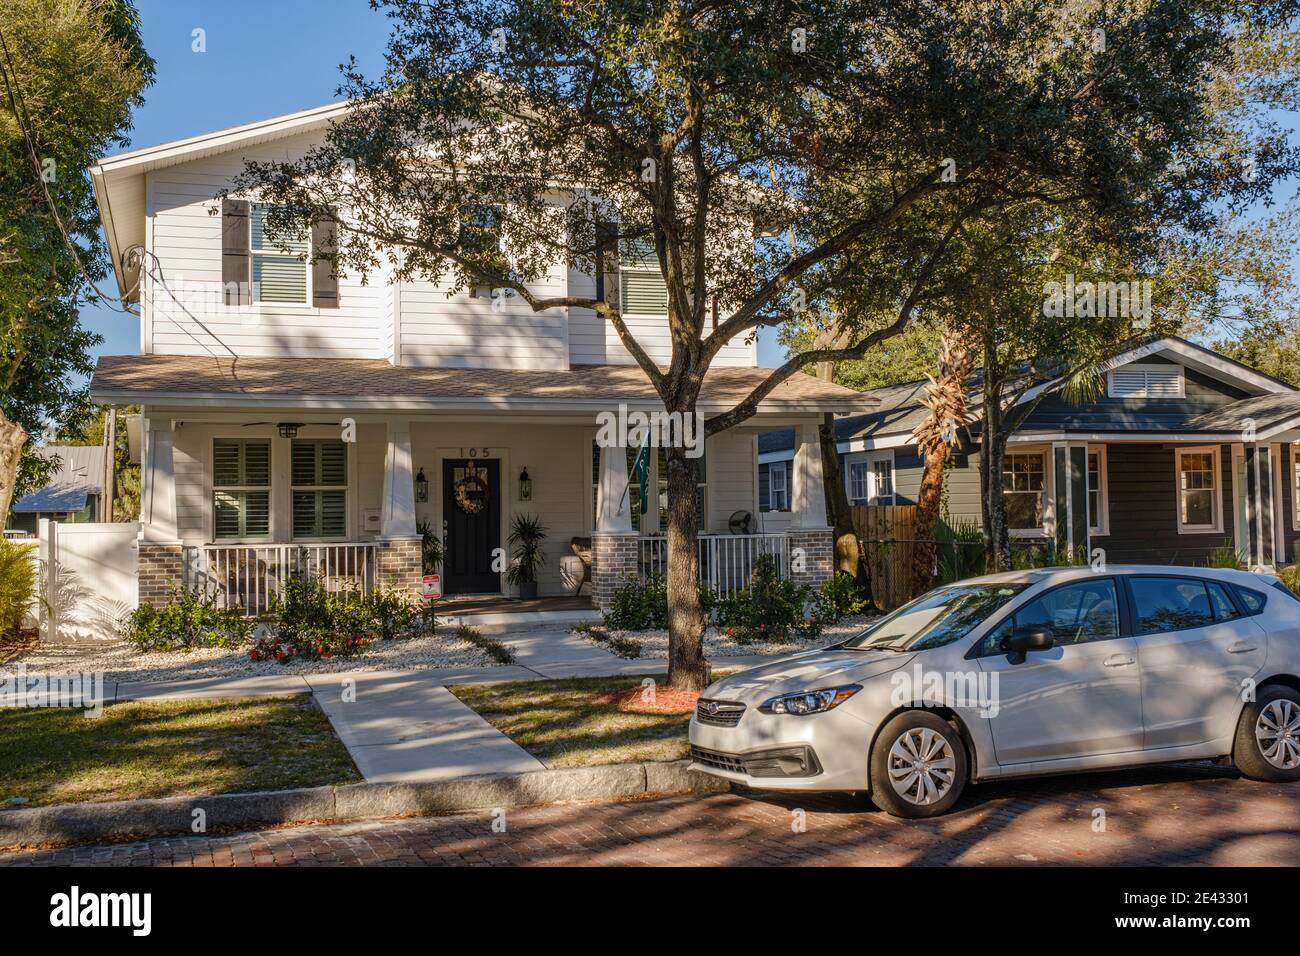 Desirable homes- Tampa Heights, Tampa, Florida. Tampa's first suburb established in 1883. The Tampa Heights neighborhood has been experiencing gentrif Stock Photo